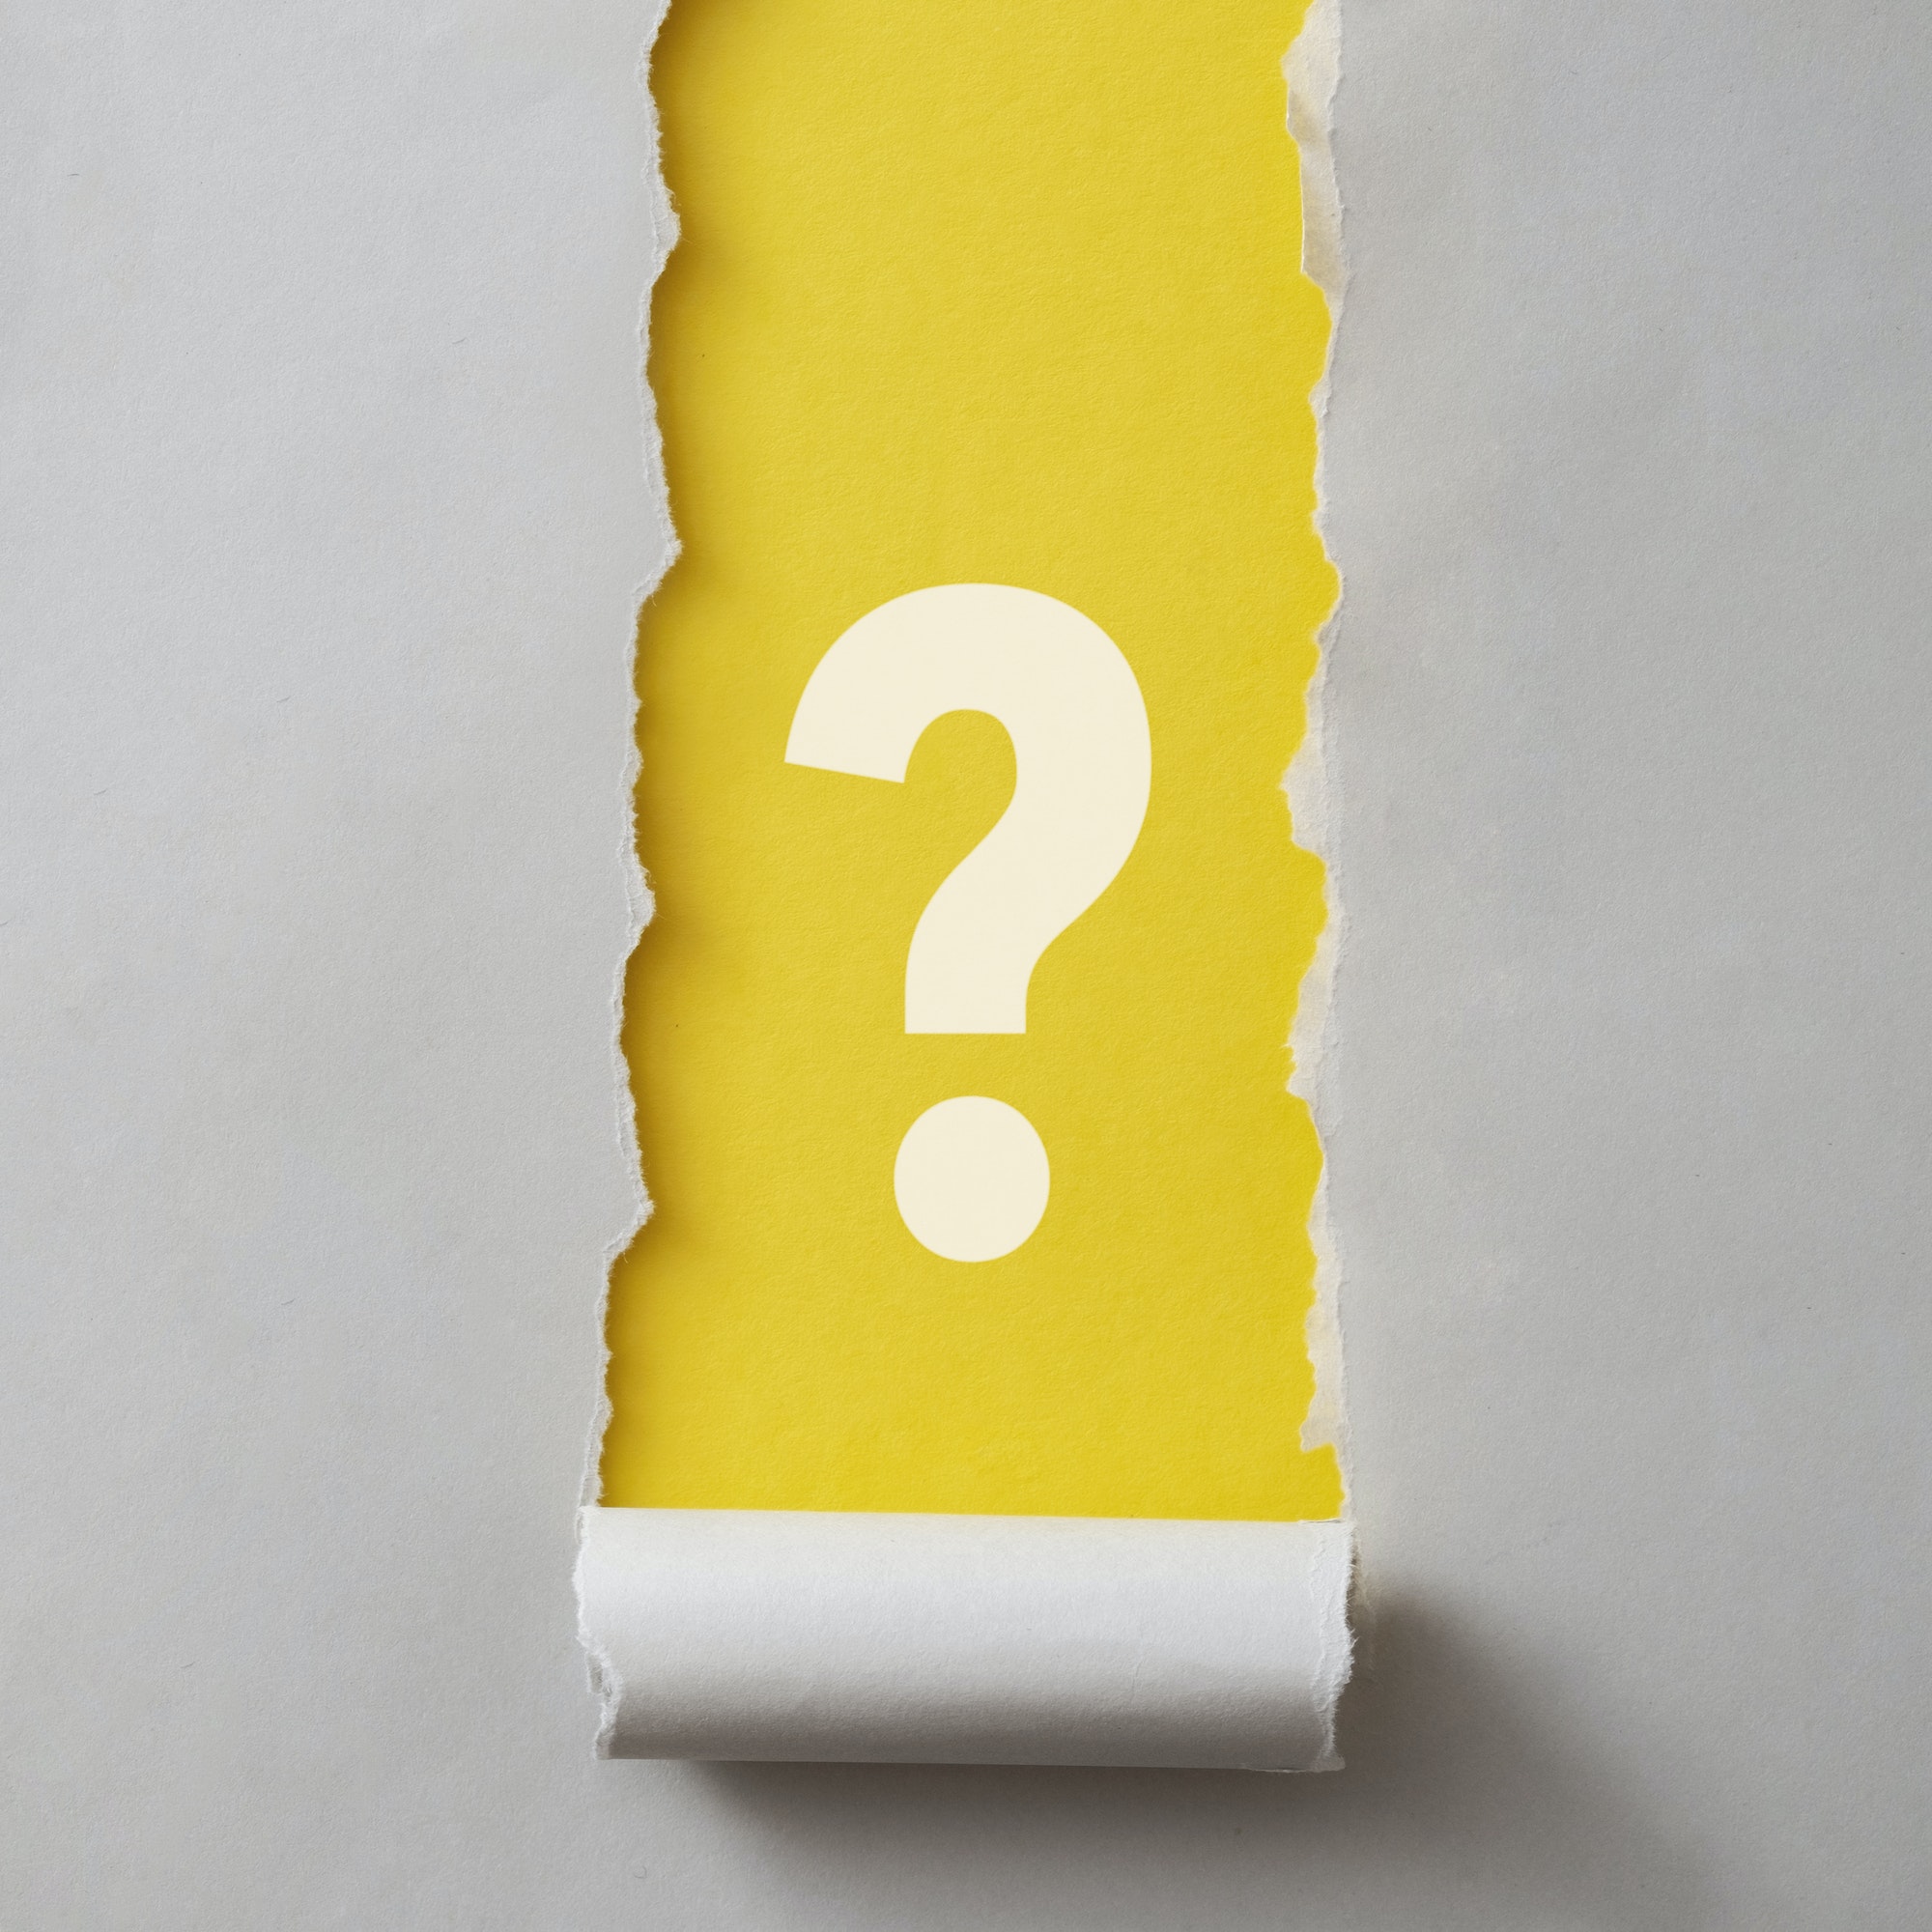 Colorful vivid yellow banner with question mark